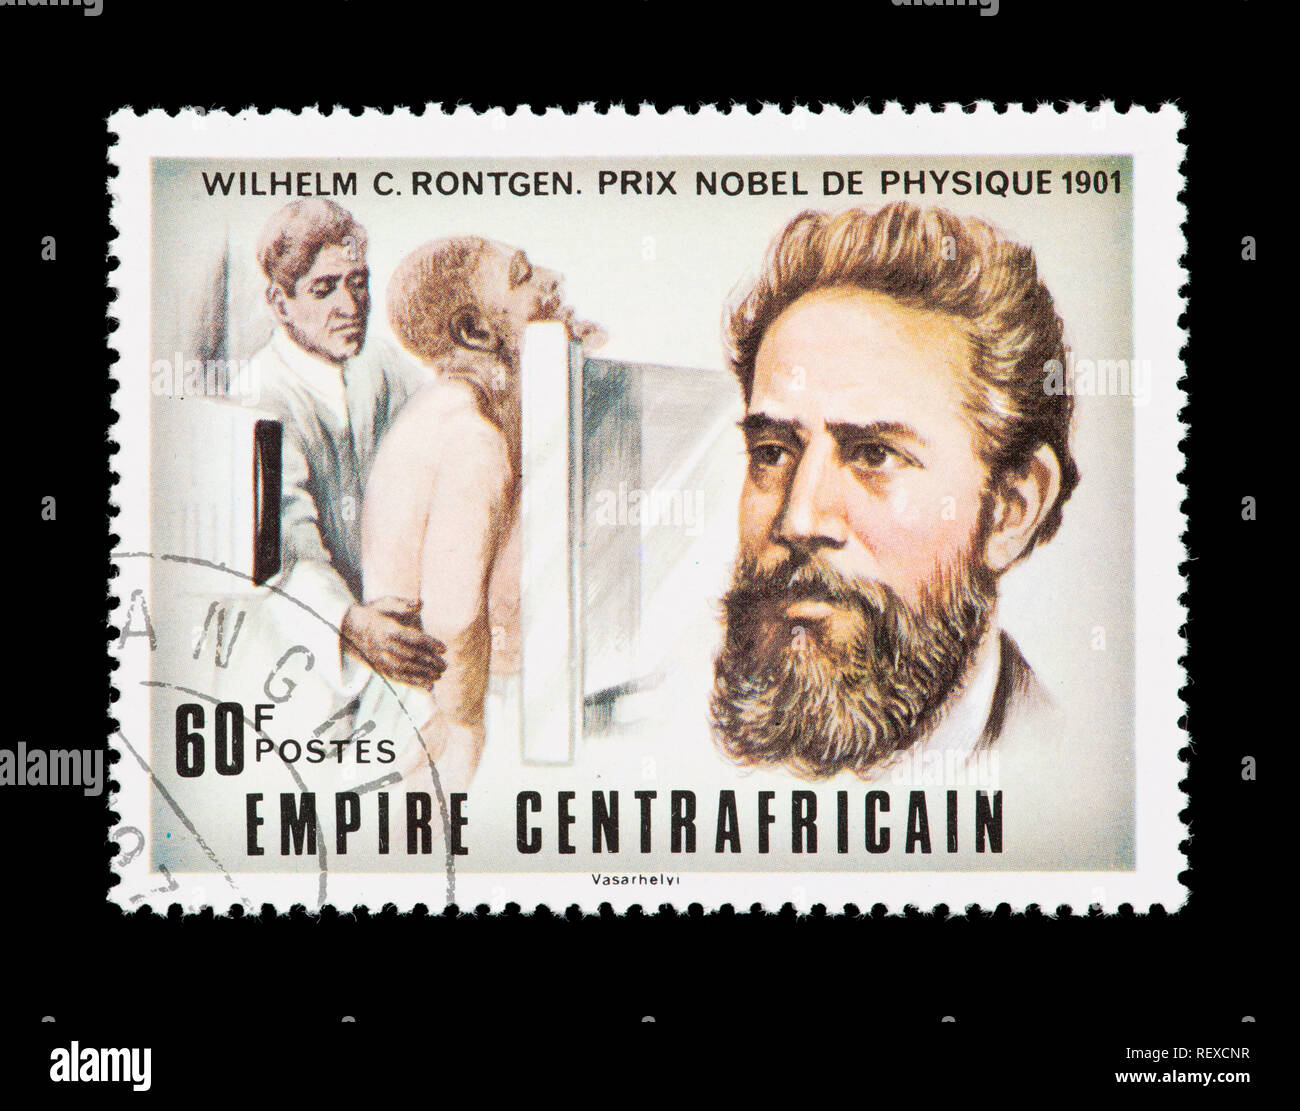 Postage stamp from the Central African Republic depicting Wilhelm Conrad Röntgen, discover of x-rays. Stock Photo